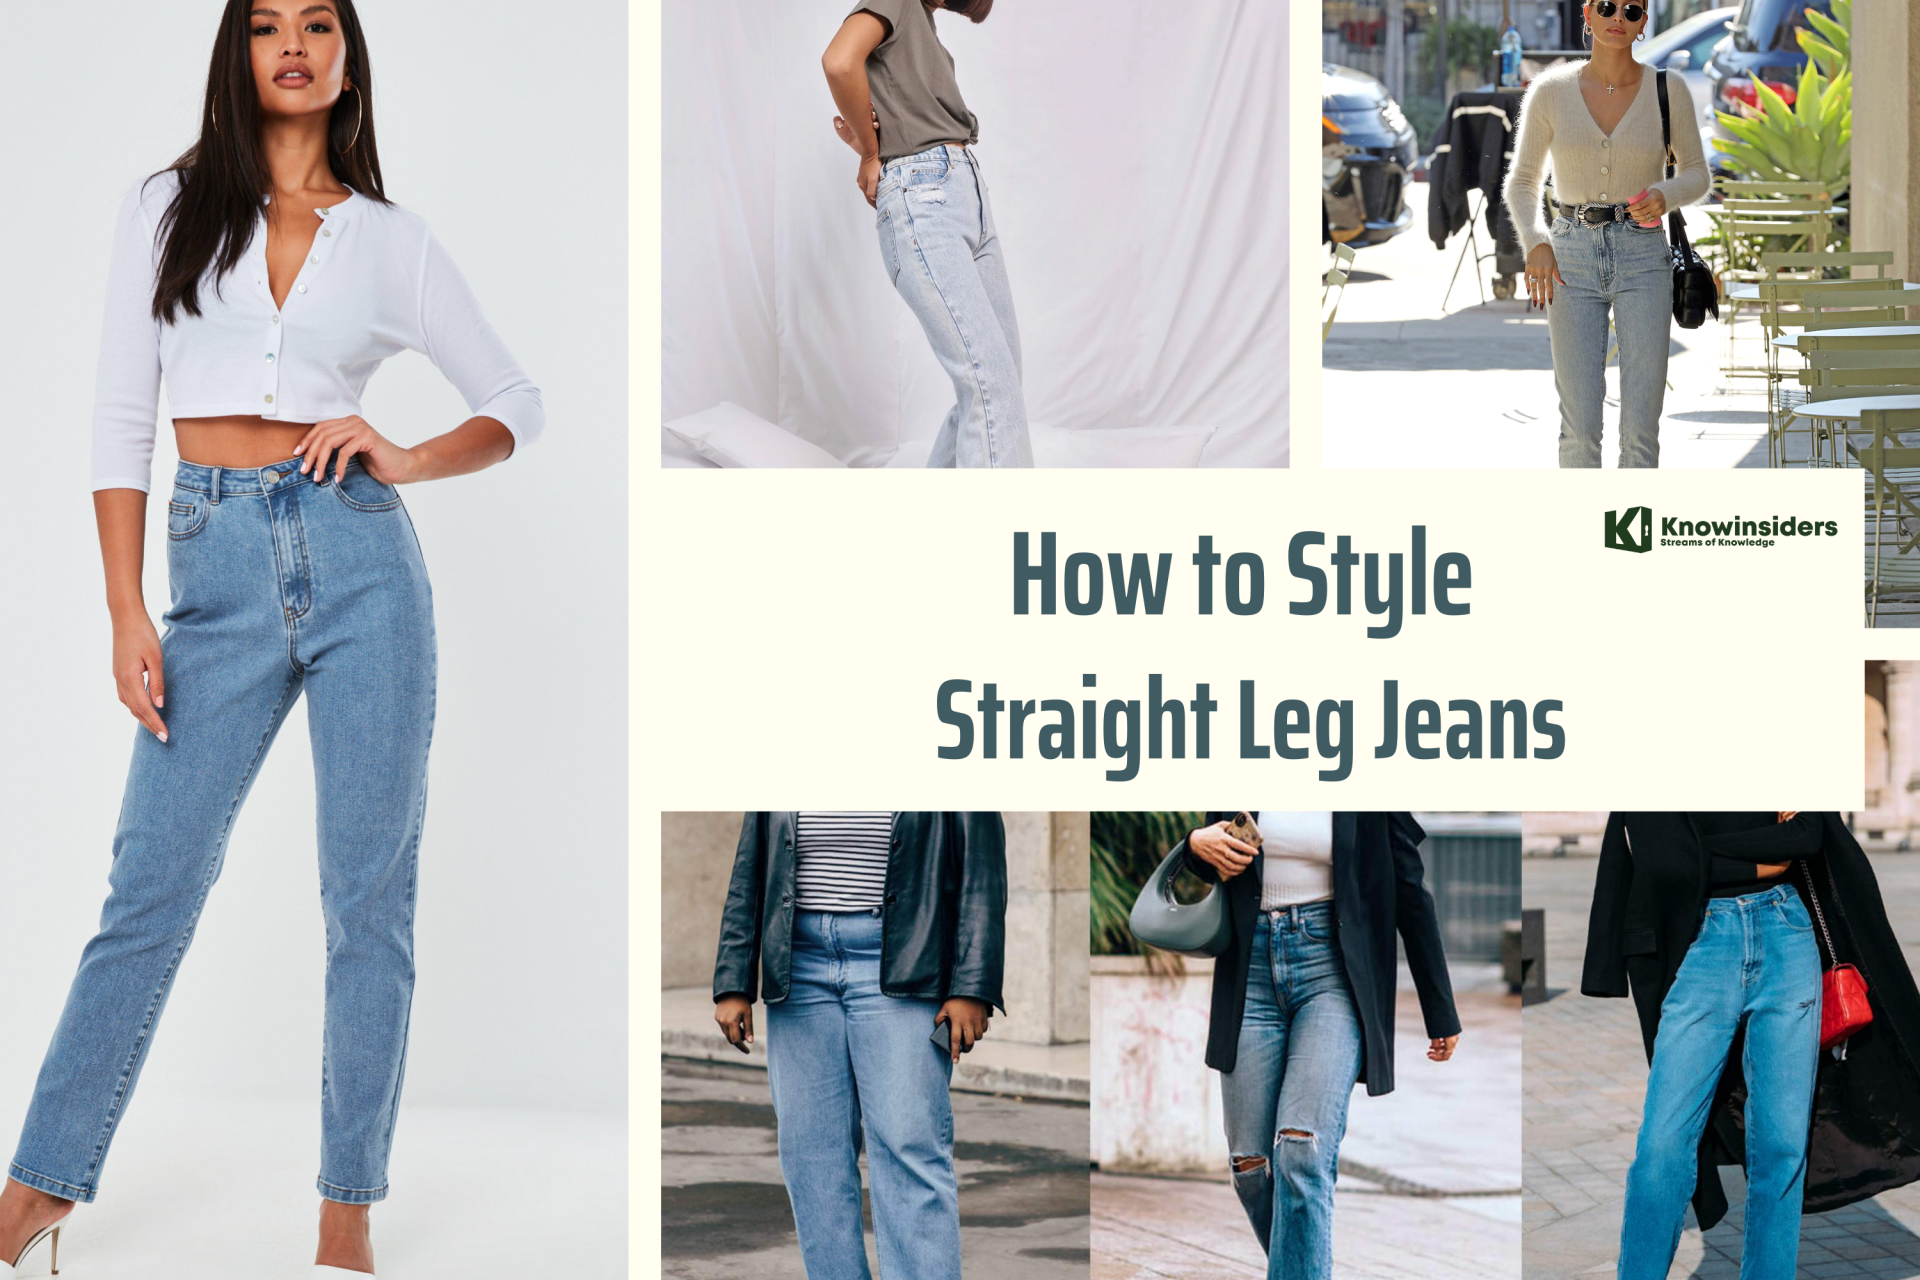 How To Style Straight Leg Jeans in 2022